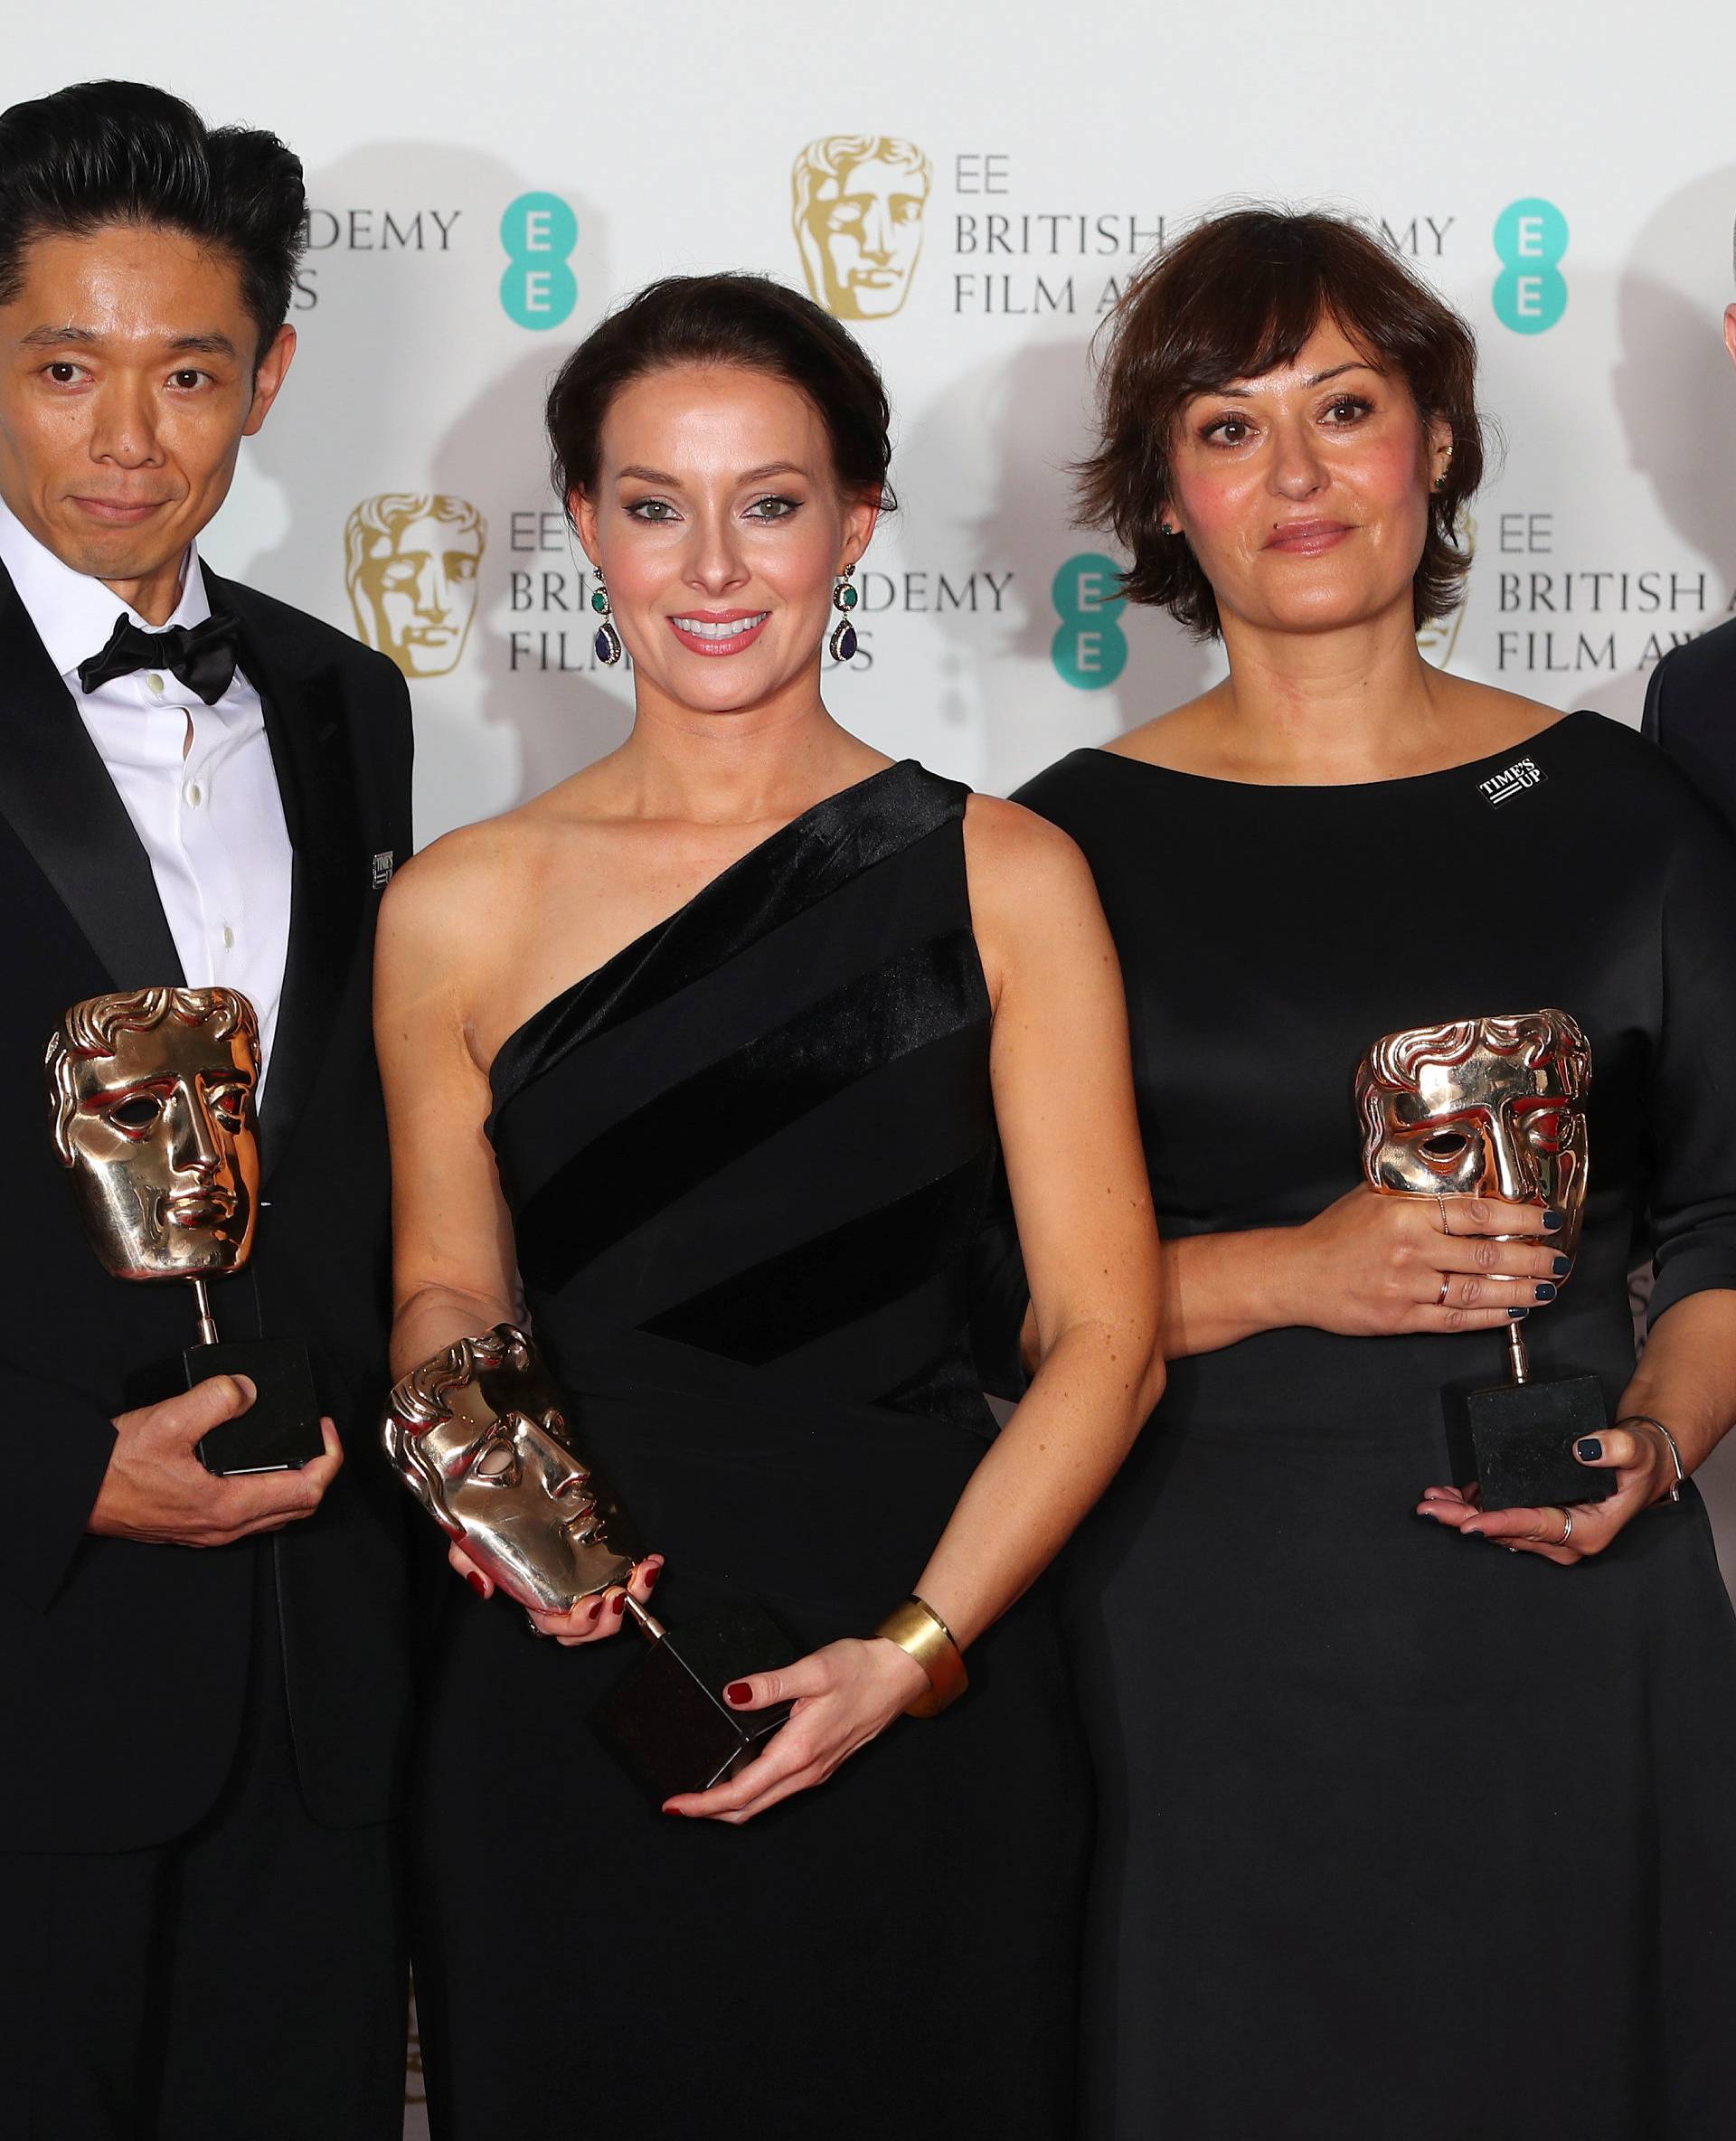 British Academy of Film and Television Awards (BAFTA) at the Royal Albert Hall in London